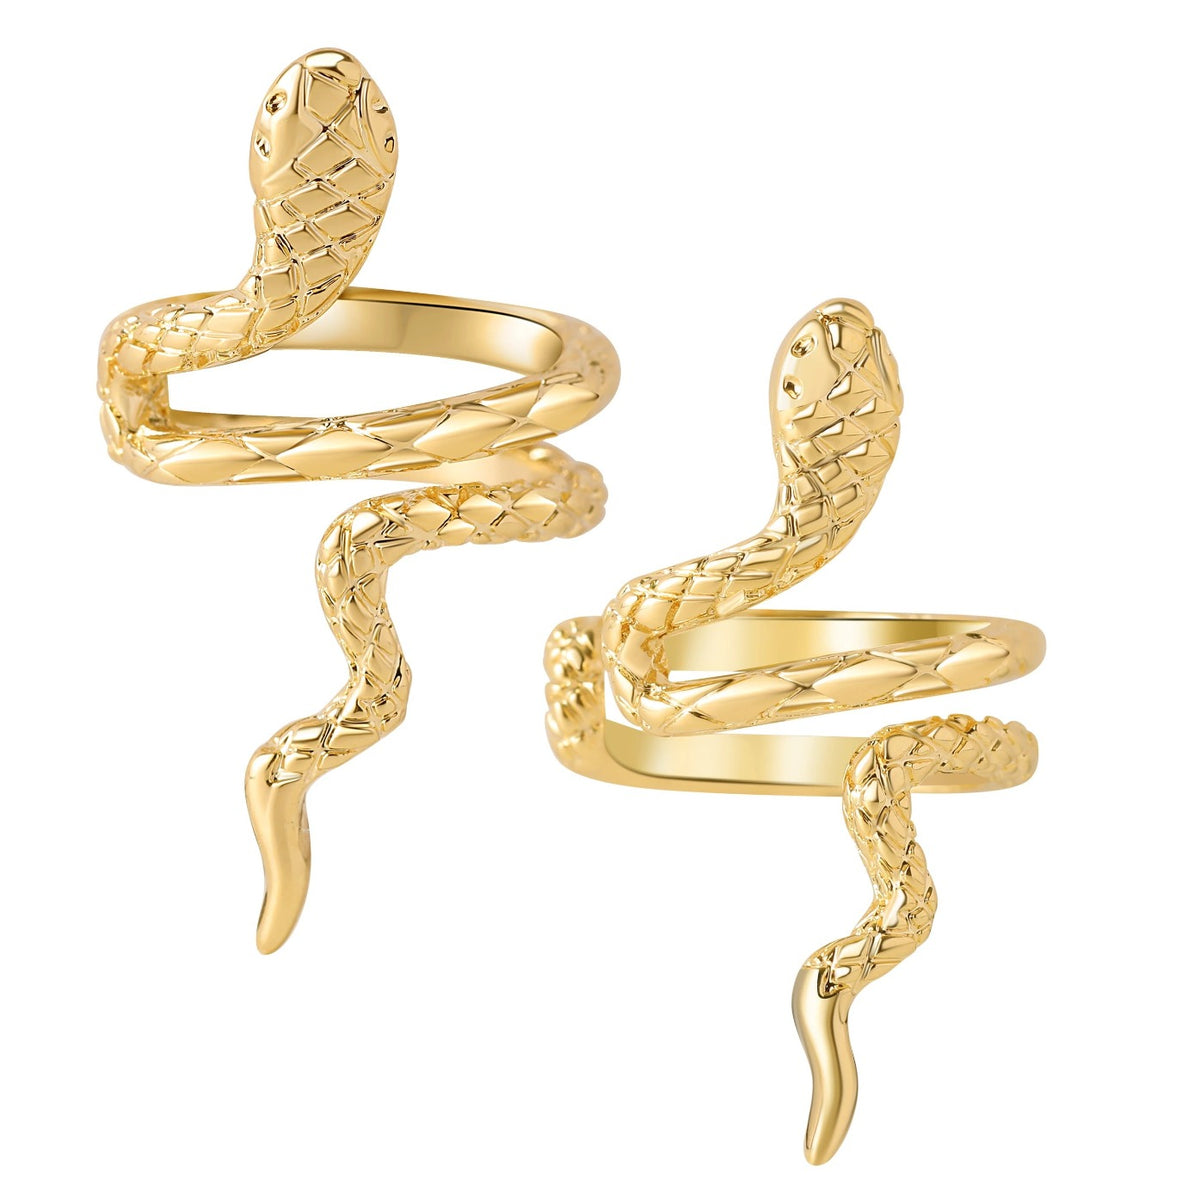 snake earring cuff 18k gold plated may-i reliquia frankly my dear